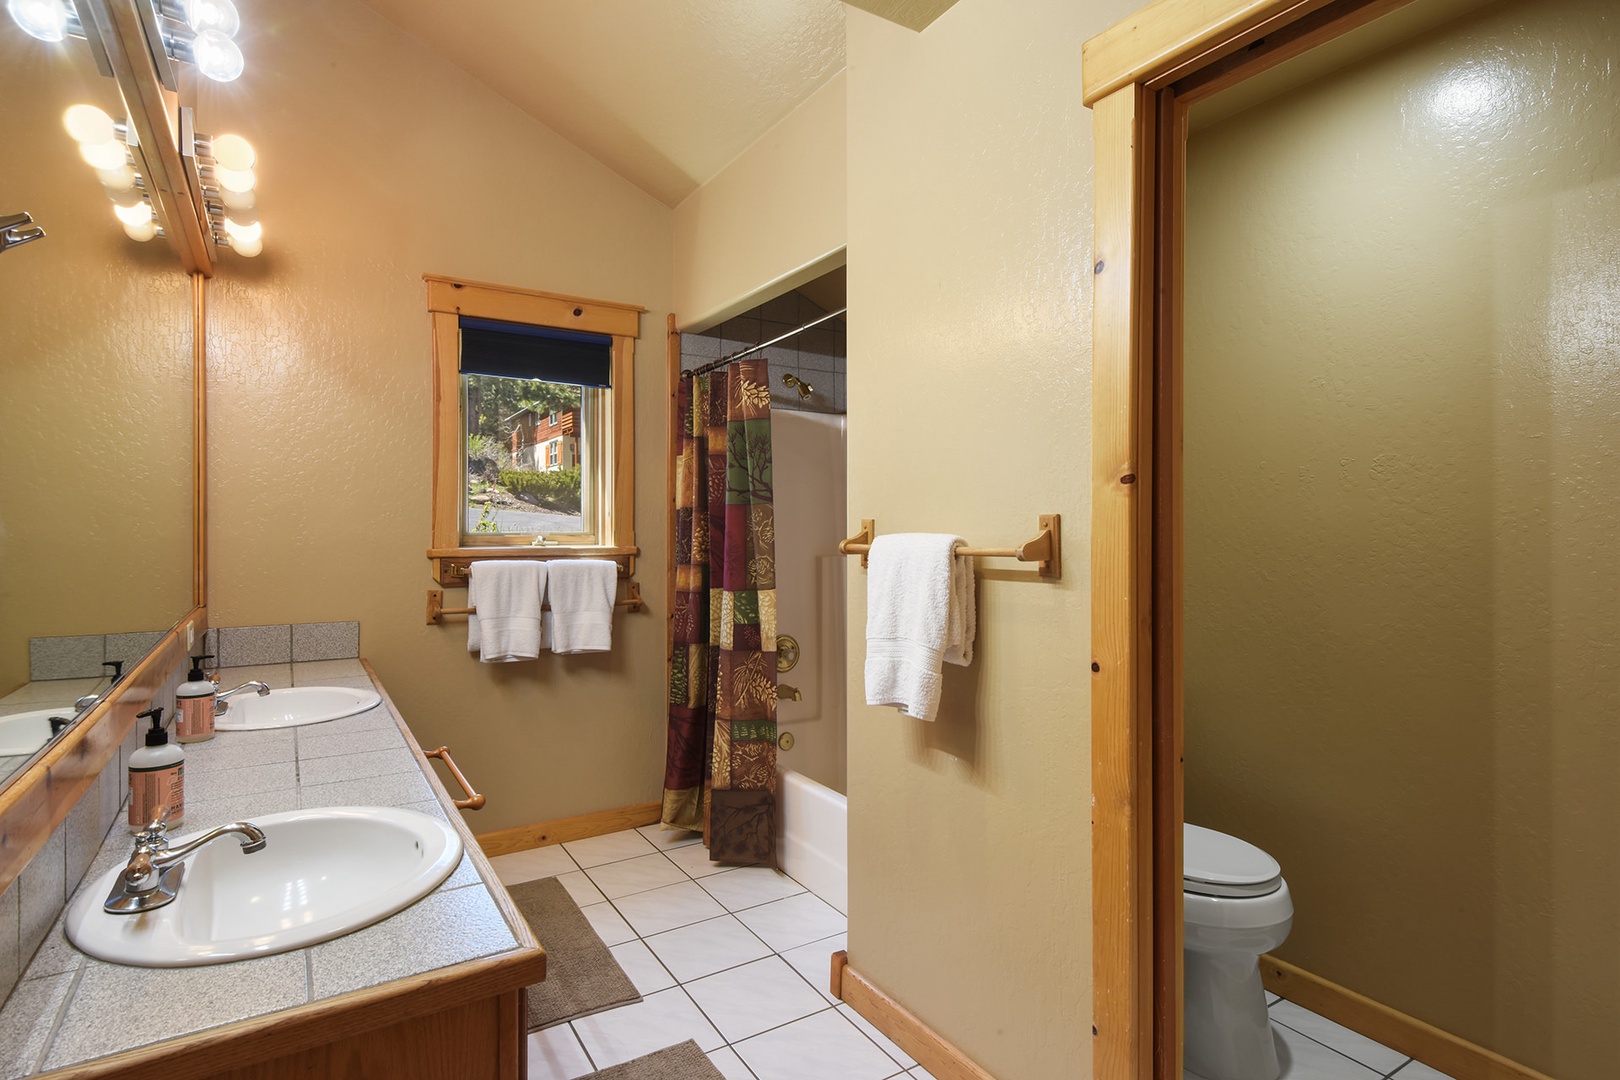 Full bathroom (2nd floor) offers double vanity and a shower/tub combo